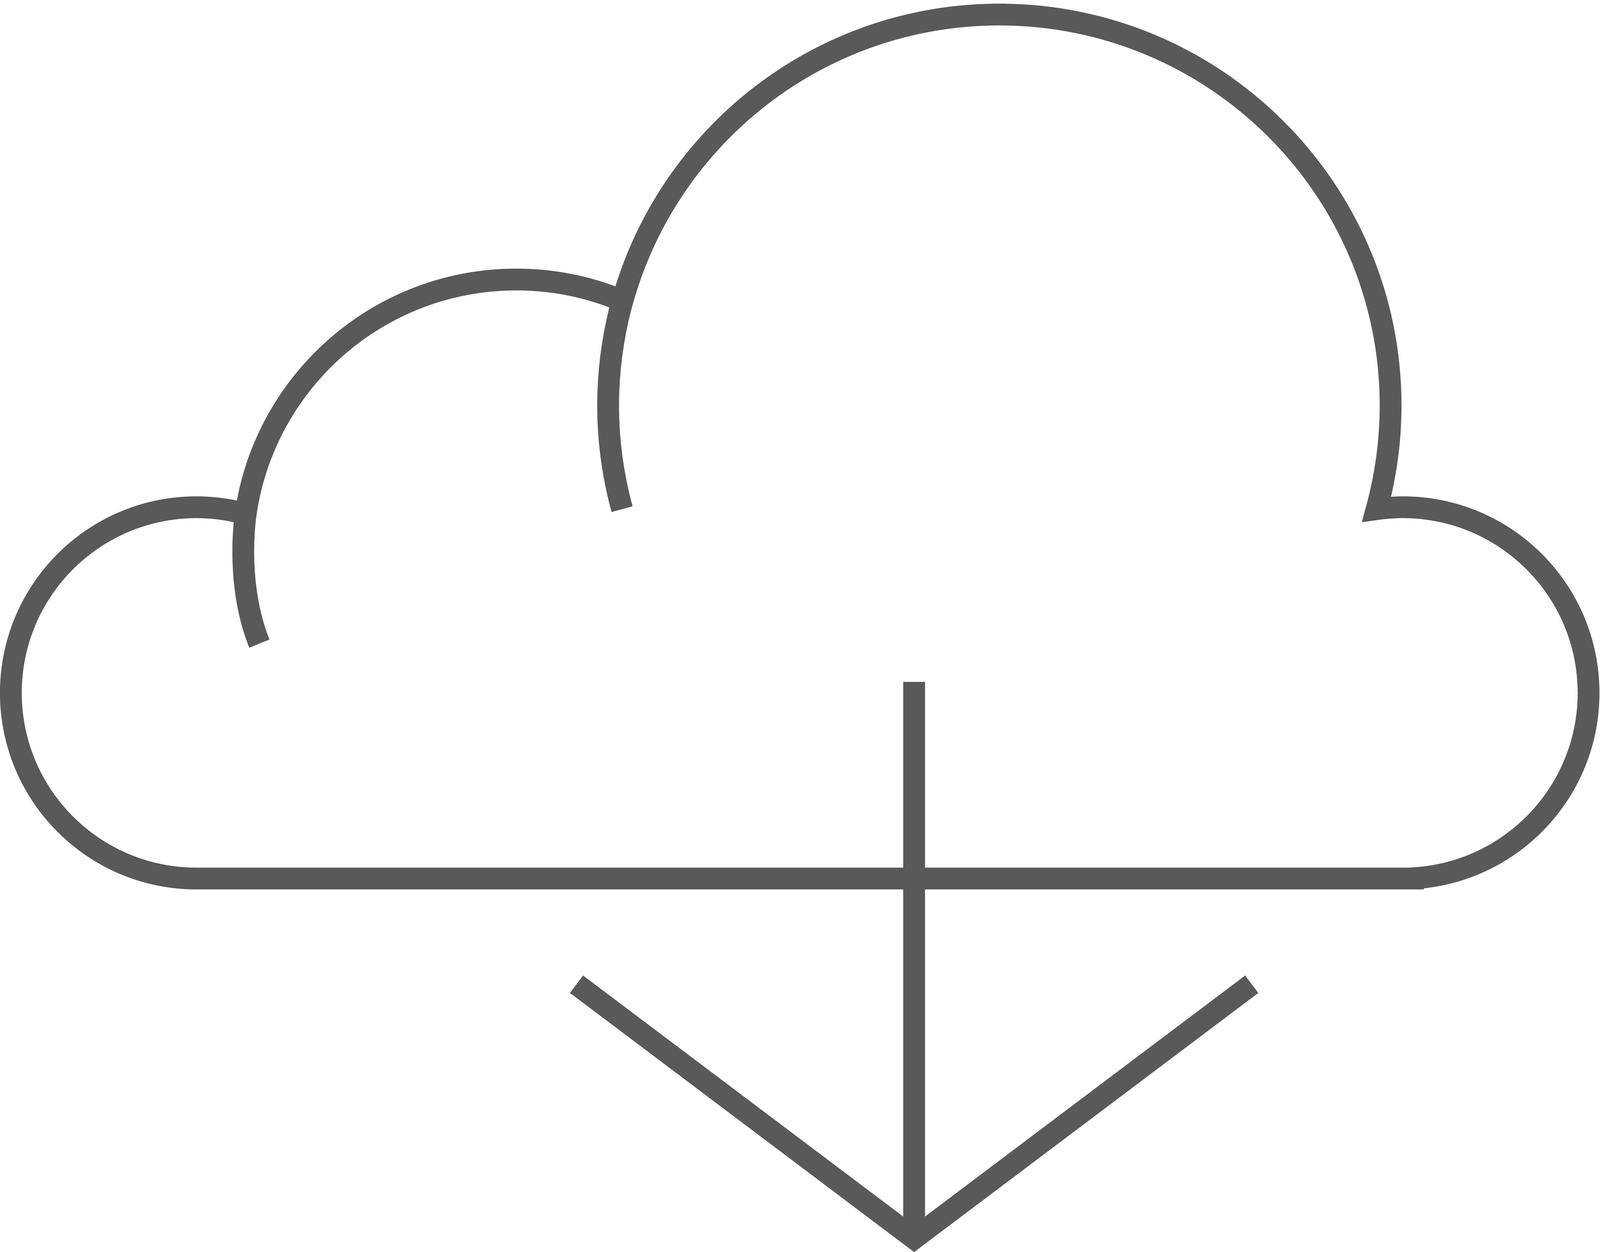 Outline icon - Cloud download by puruan